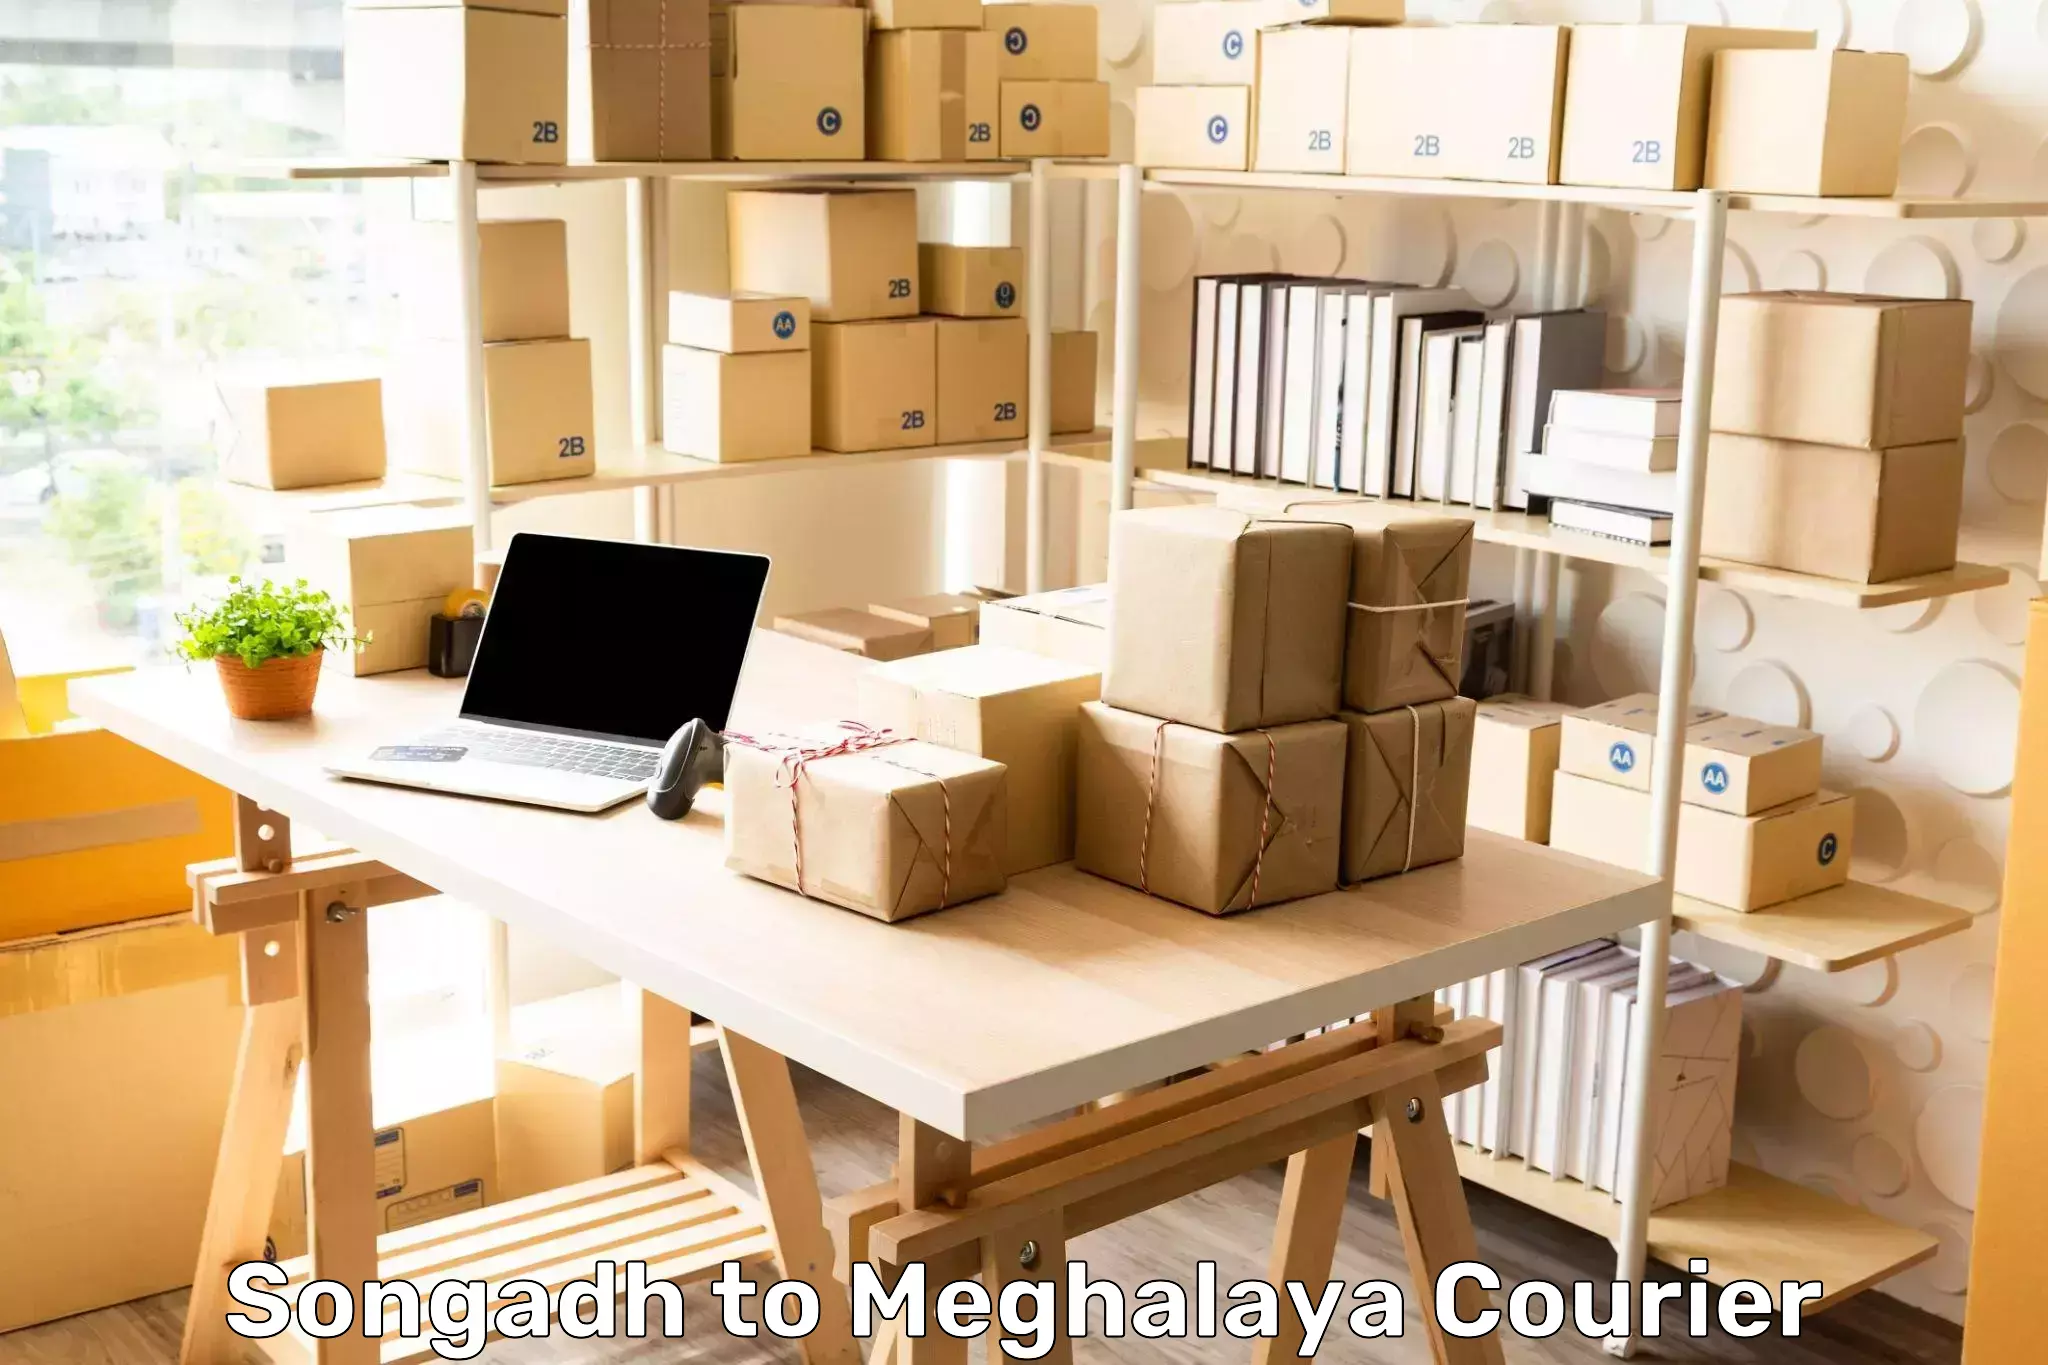 Business courier solutions Songadh to Tikrikilla